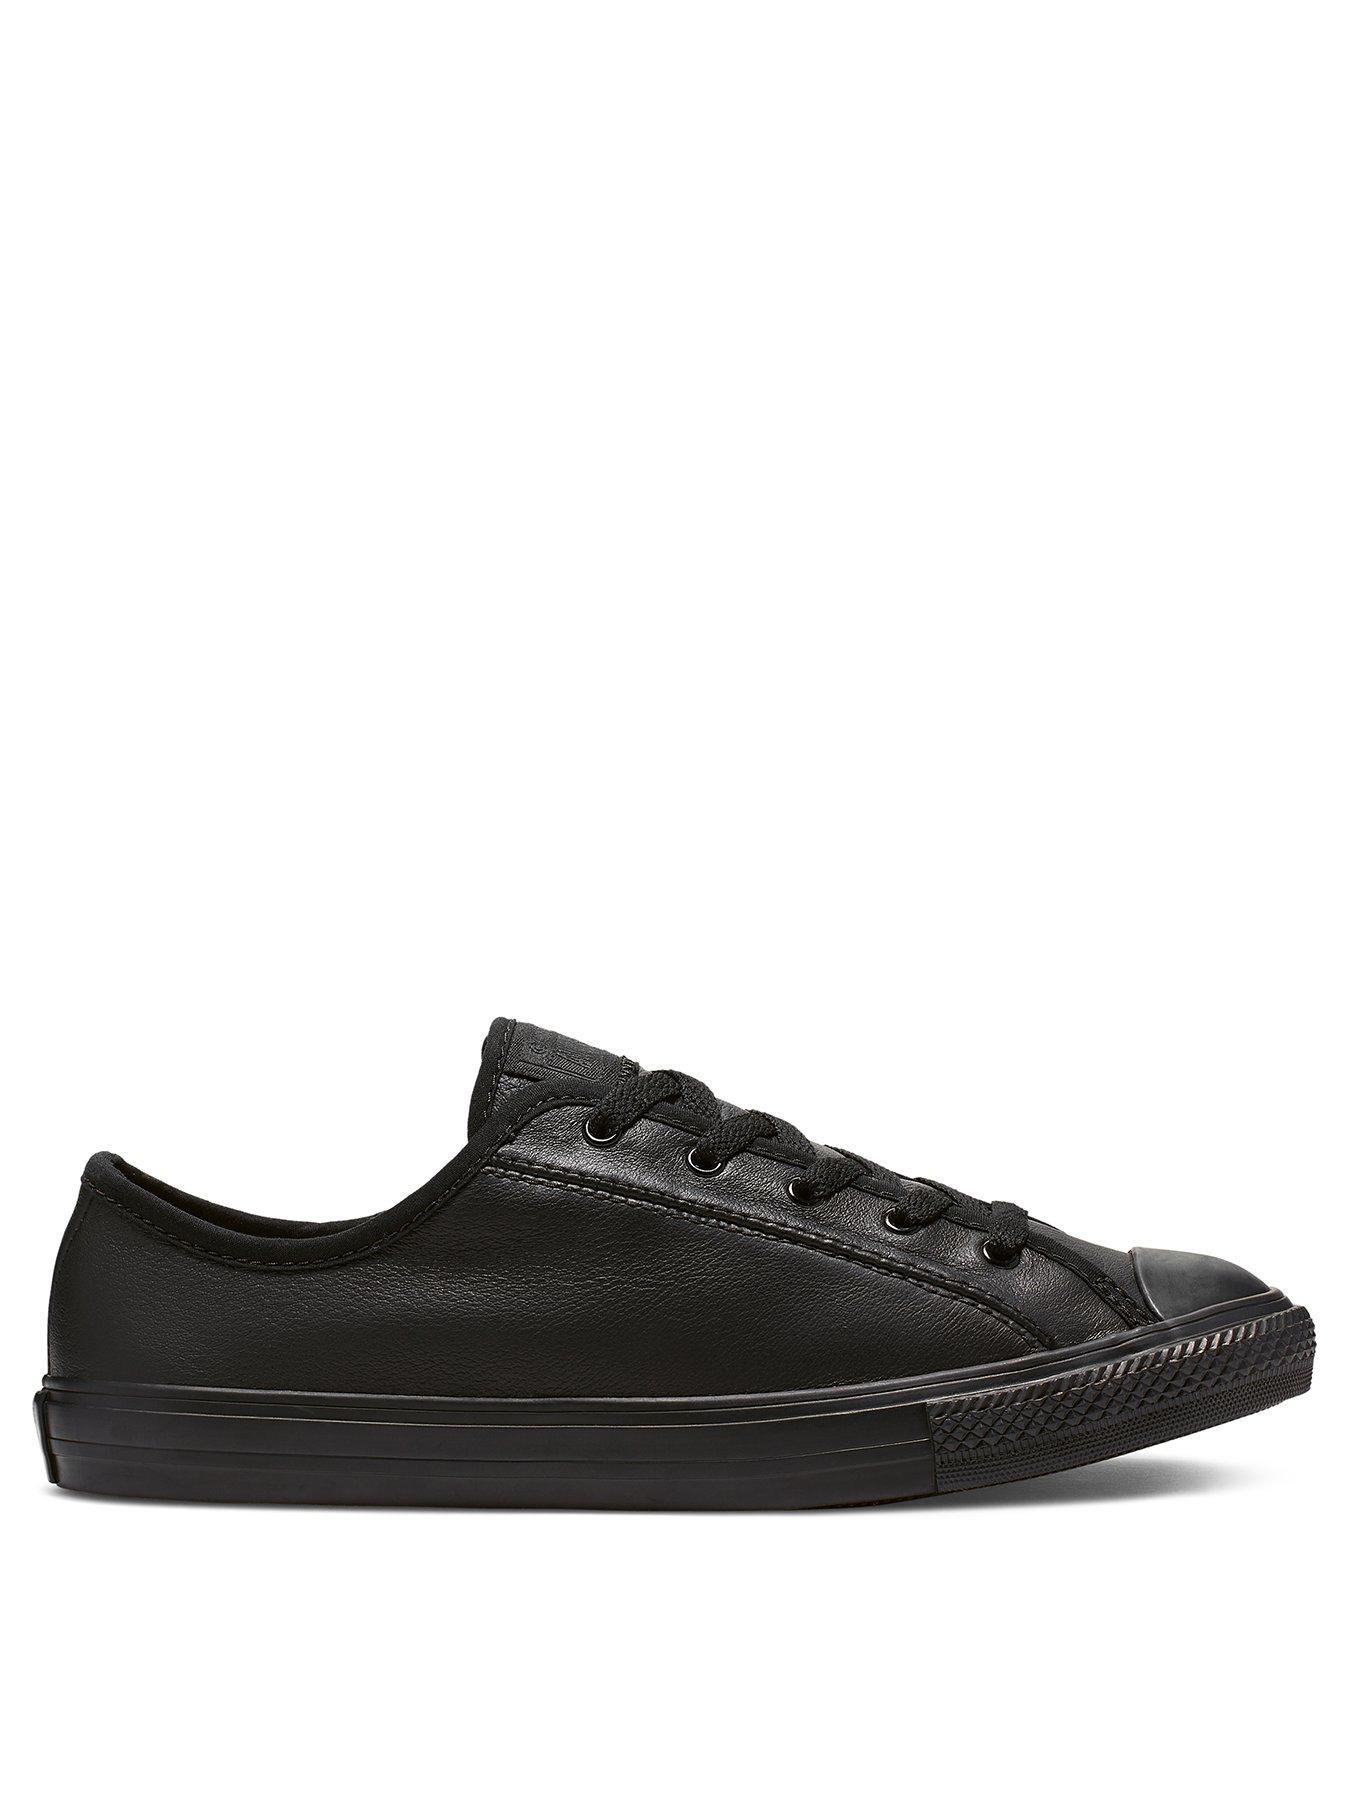 converse dainty leather black